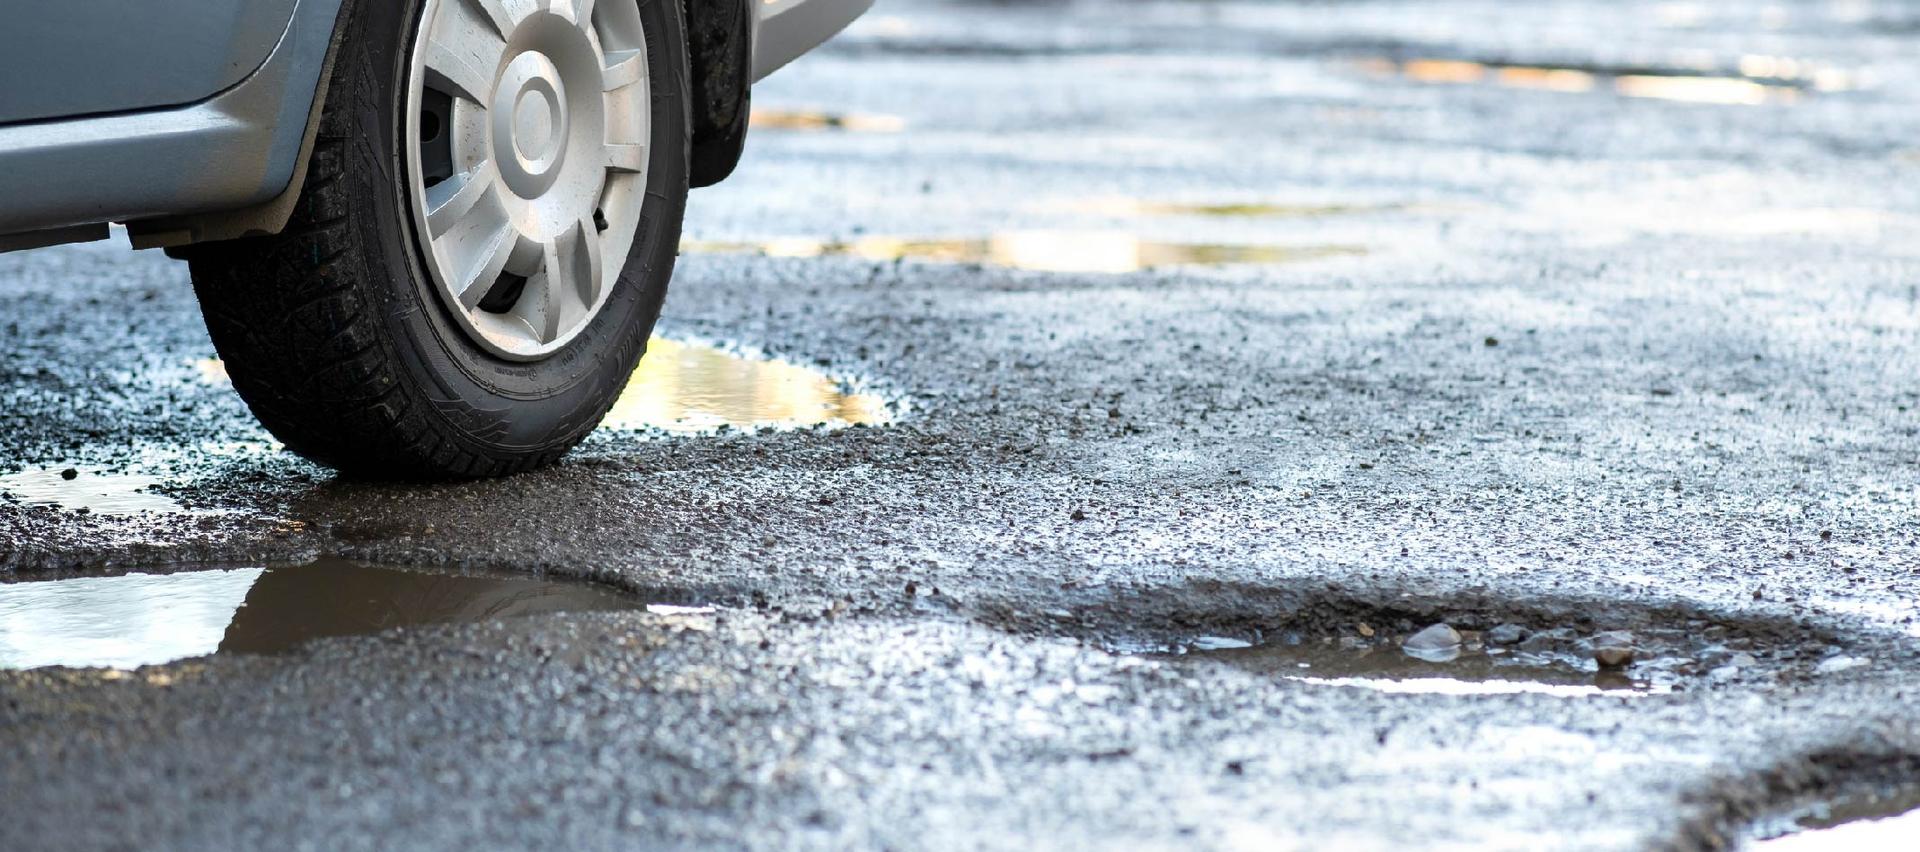 Potholes: what causes them and how do you claim for pothole damage?